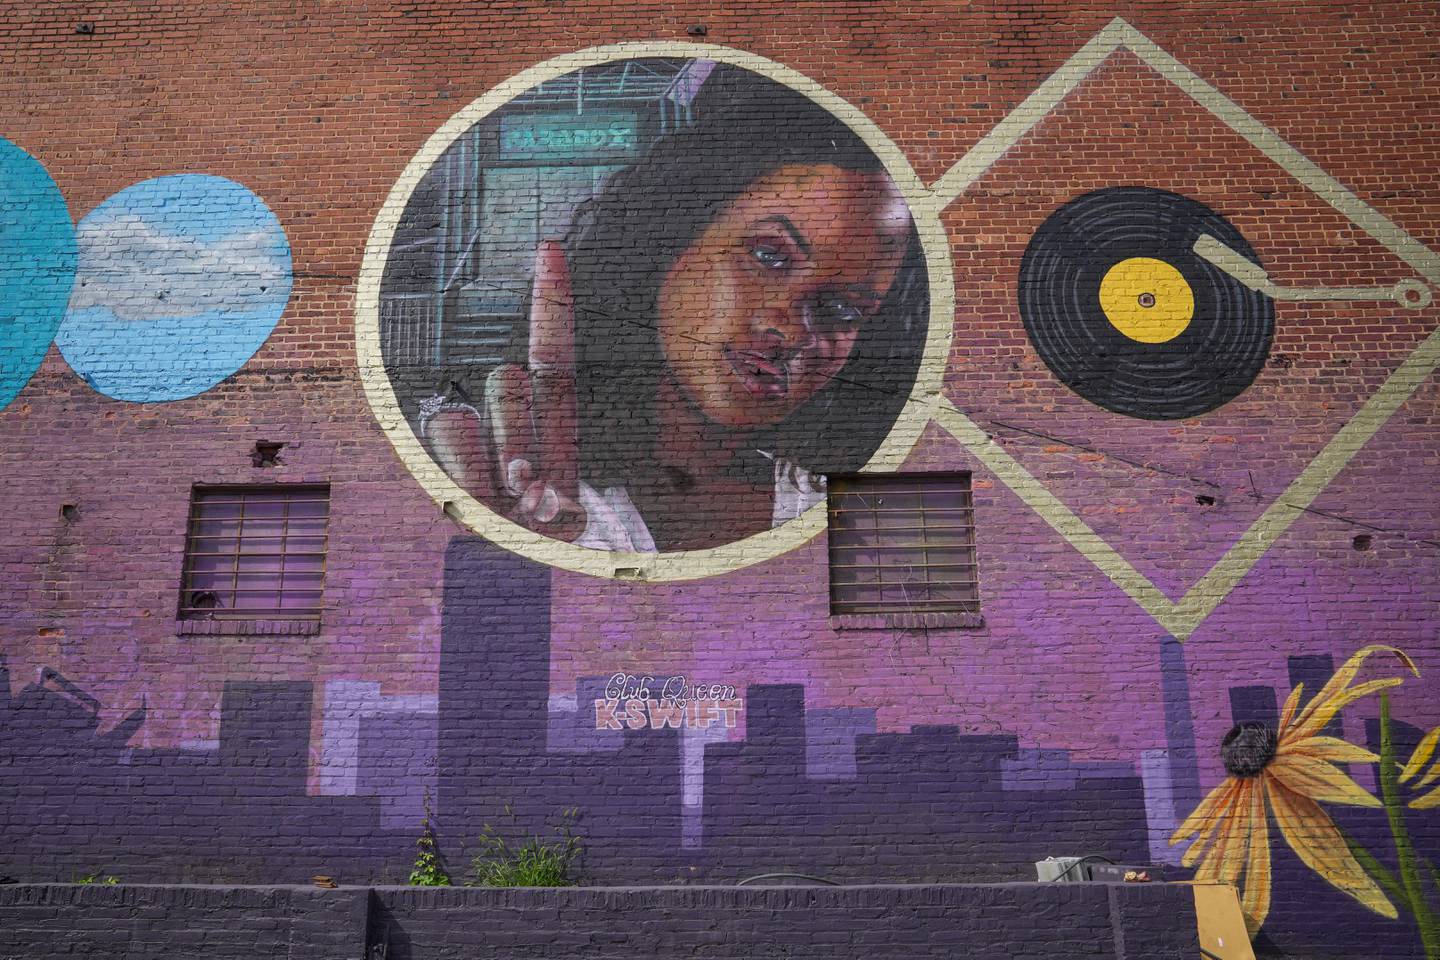 The K-Swift mural on the wall of Hammerjacks in South Baltimore, painted by Nether410.